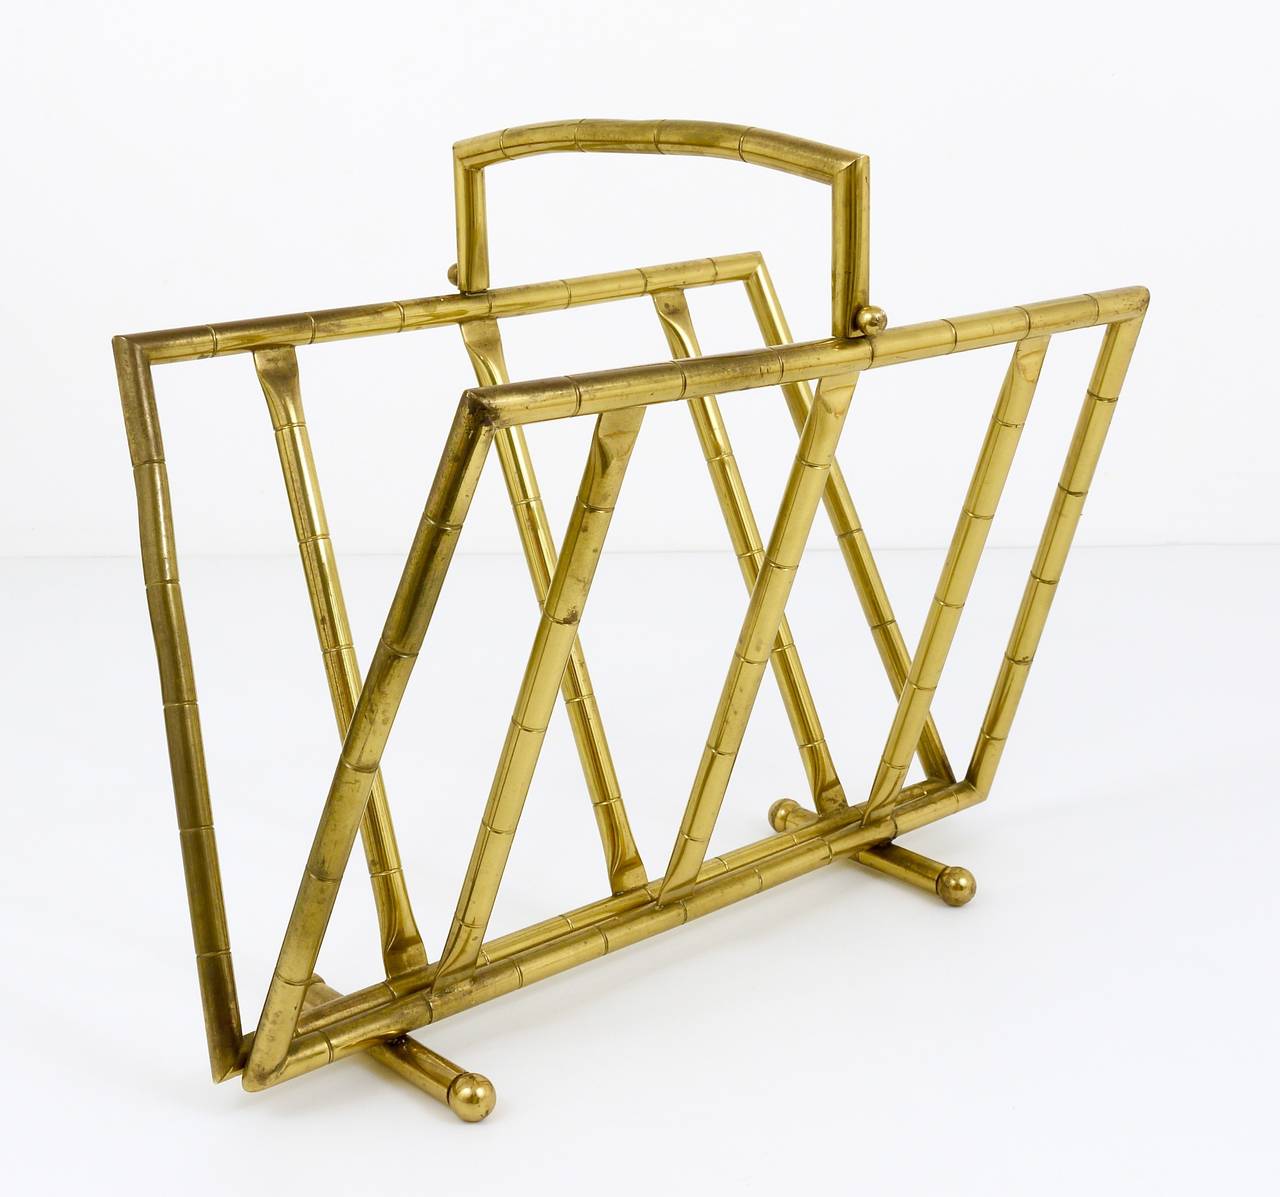 A beautiful faux bamboo magazine rack, made of brass. Made in Italy, 1970s. In good condition with nice patina on the brass.